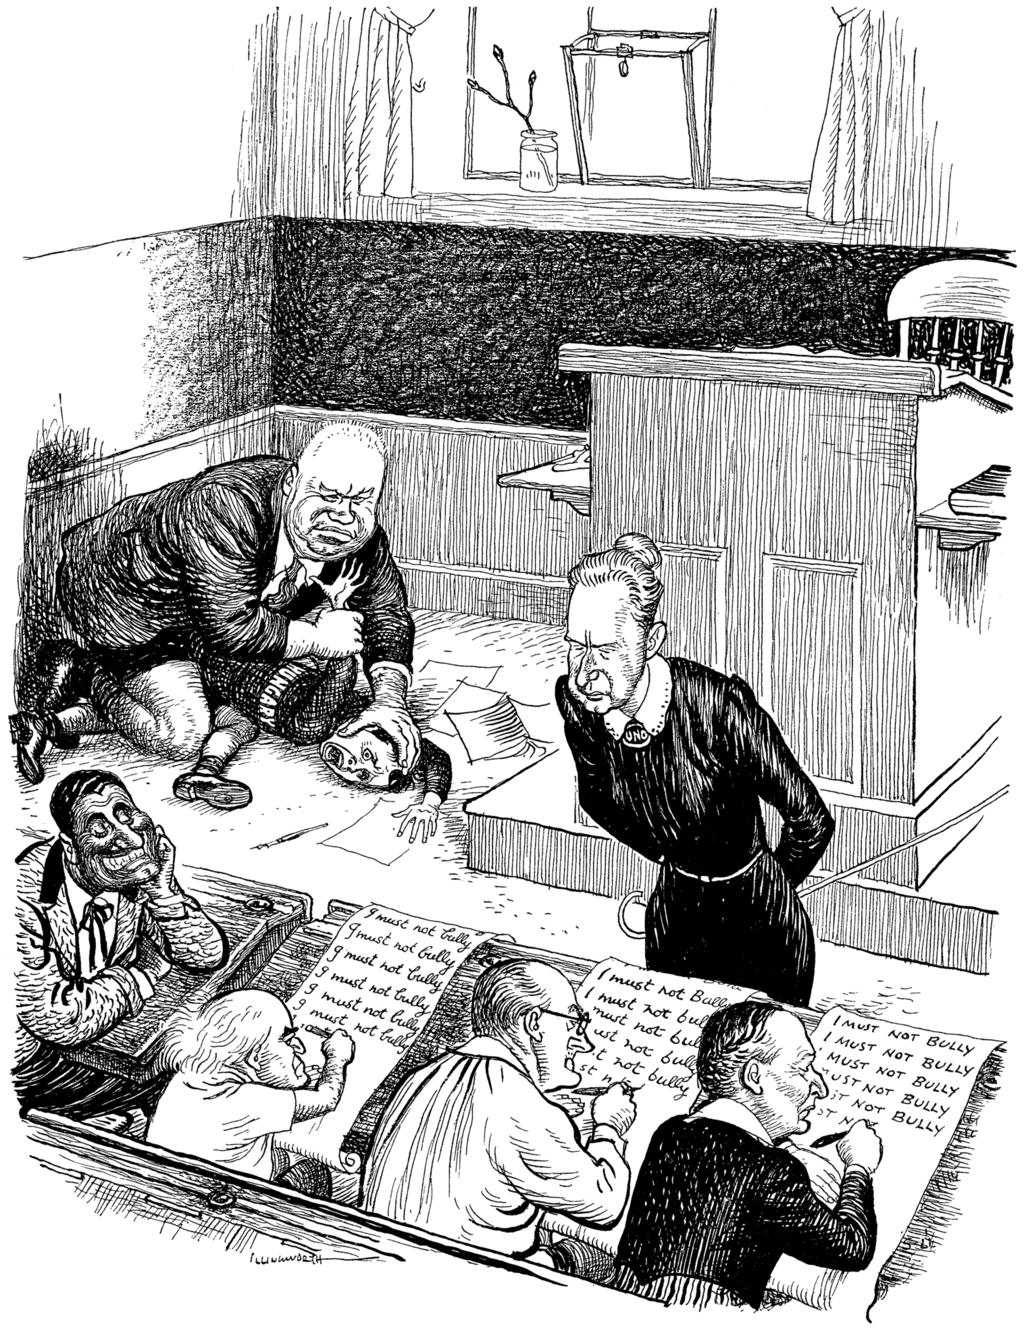 8 SOURCE C A cartoon from a British magazine published in November 1956, during the Suez Crisis.